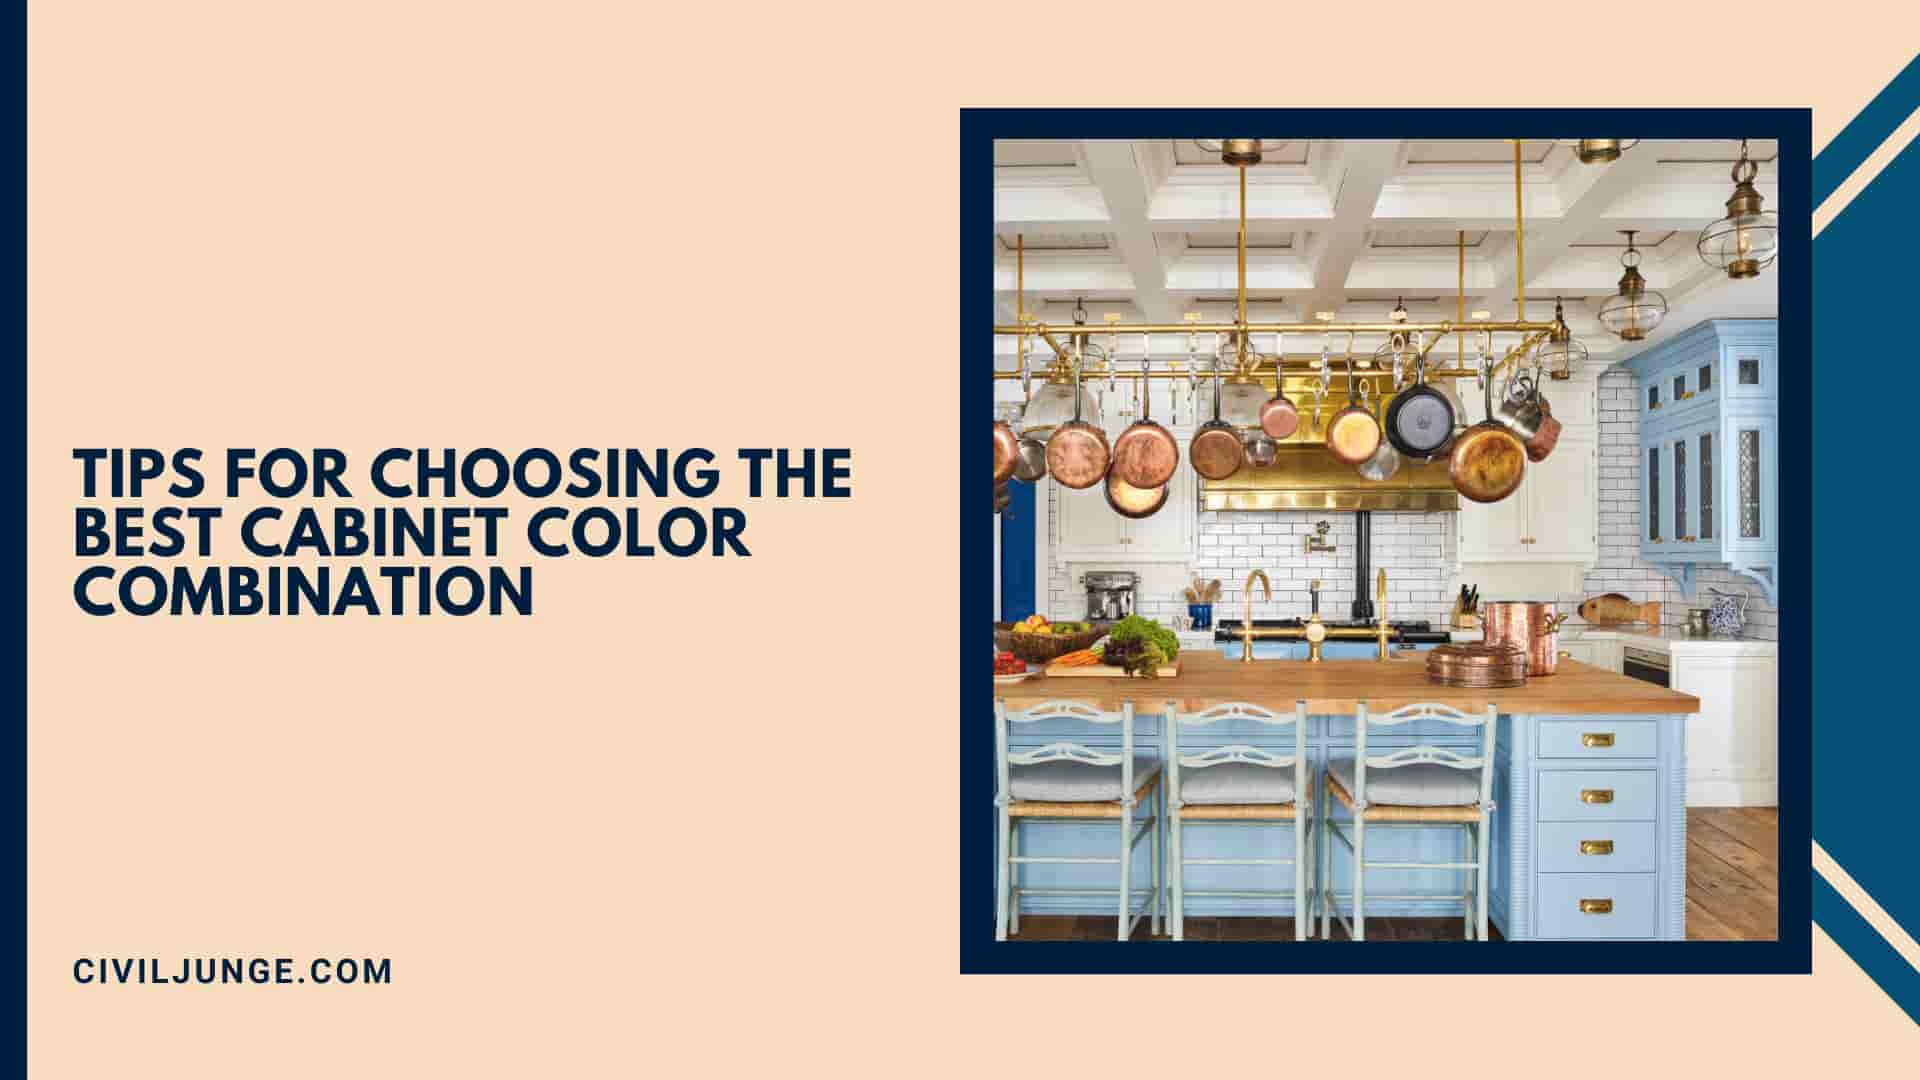 Tips for Choosing the Best Cabinet Color Combination